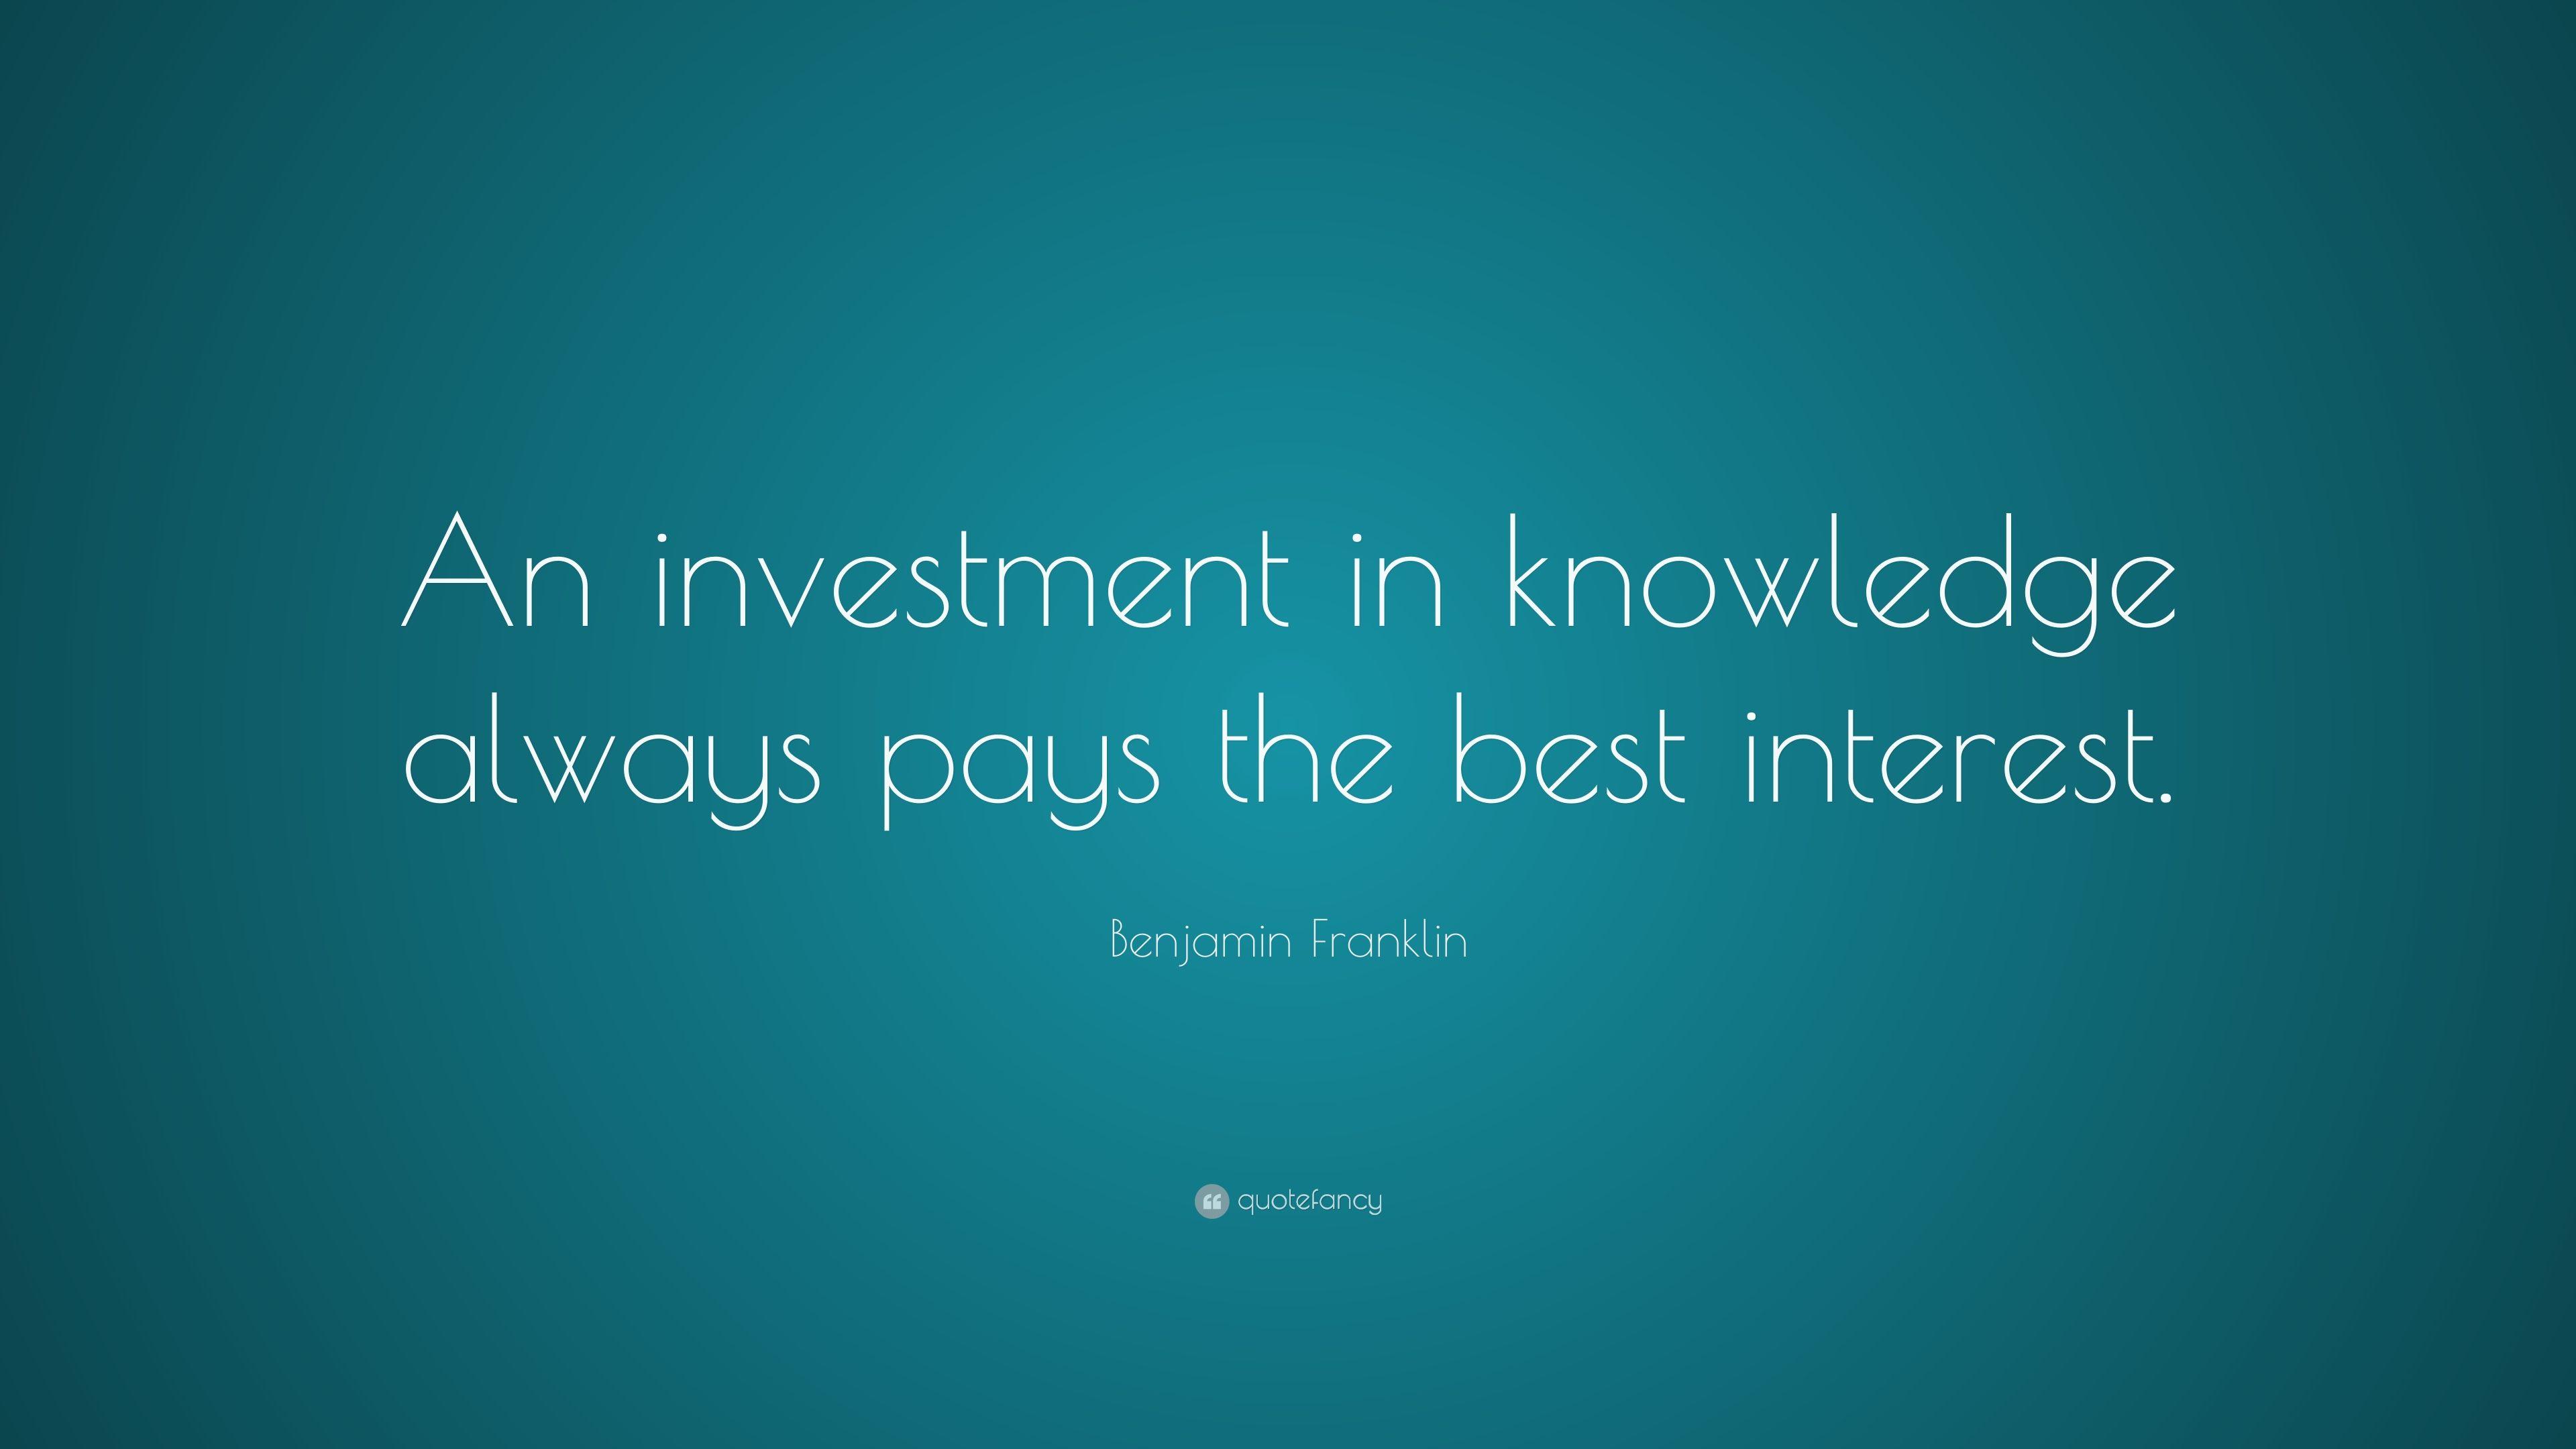 Benjamin Franklin Quote: “An investment in knowledge always pays